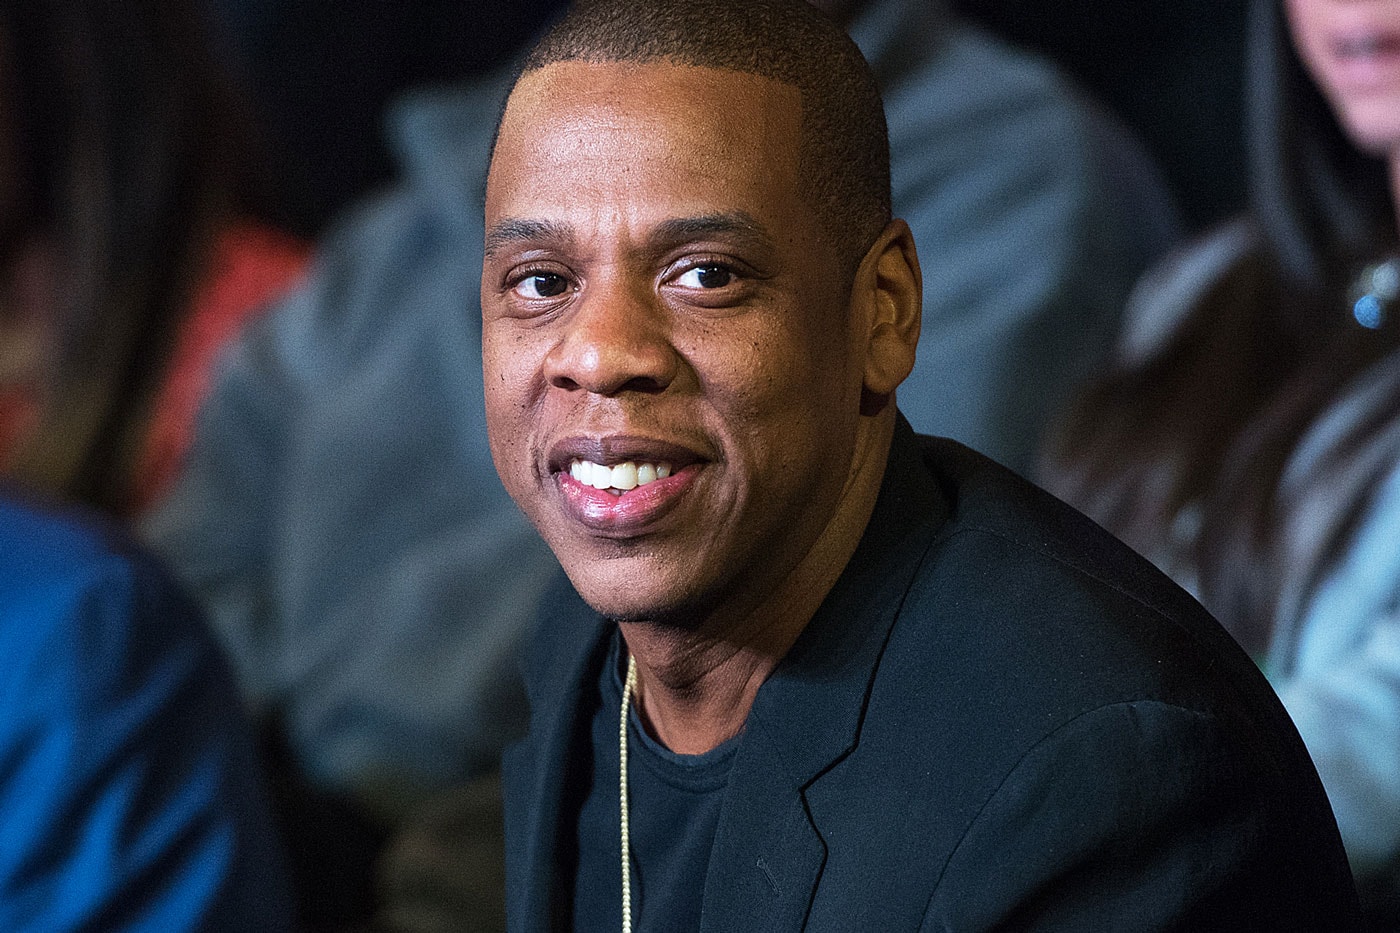 JAY Z and Timbaland Attend Inaugural "Big Pimpin'" Trial